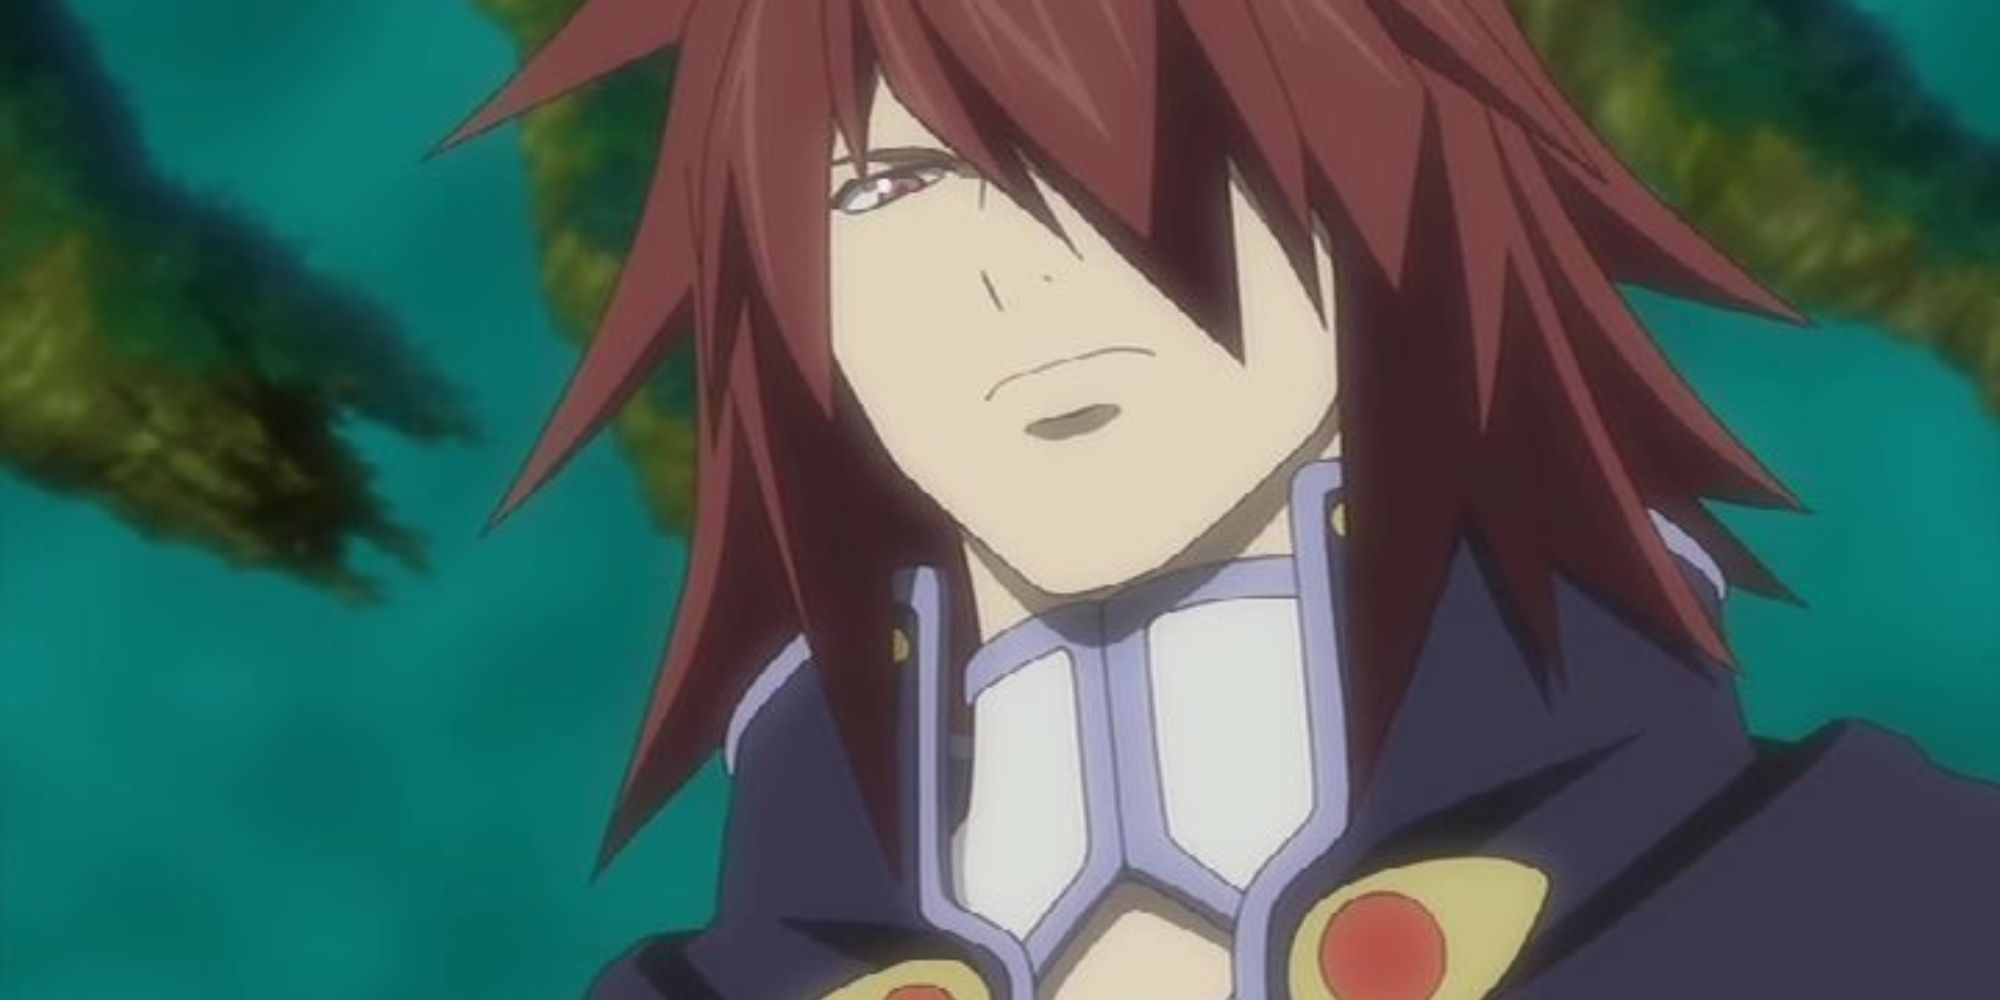 An image of Kratos from Tales of Symphonia, looking downward with an expression of anger.